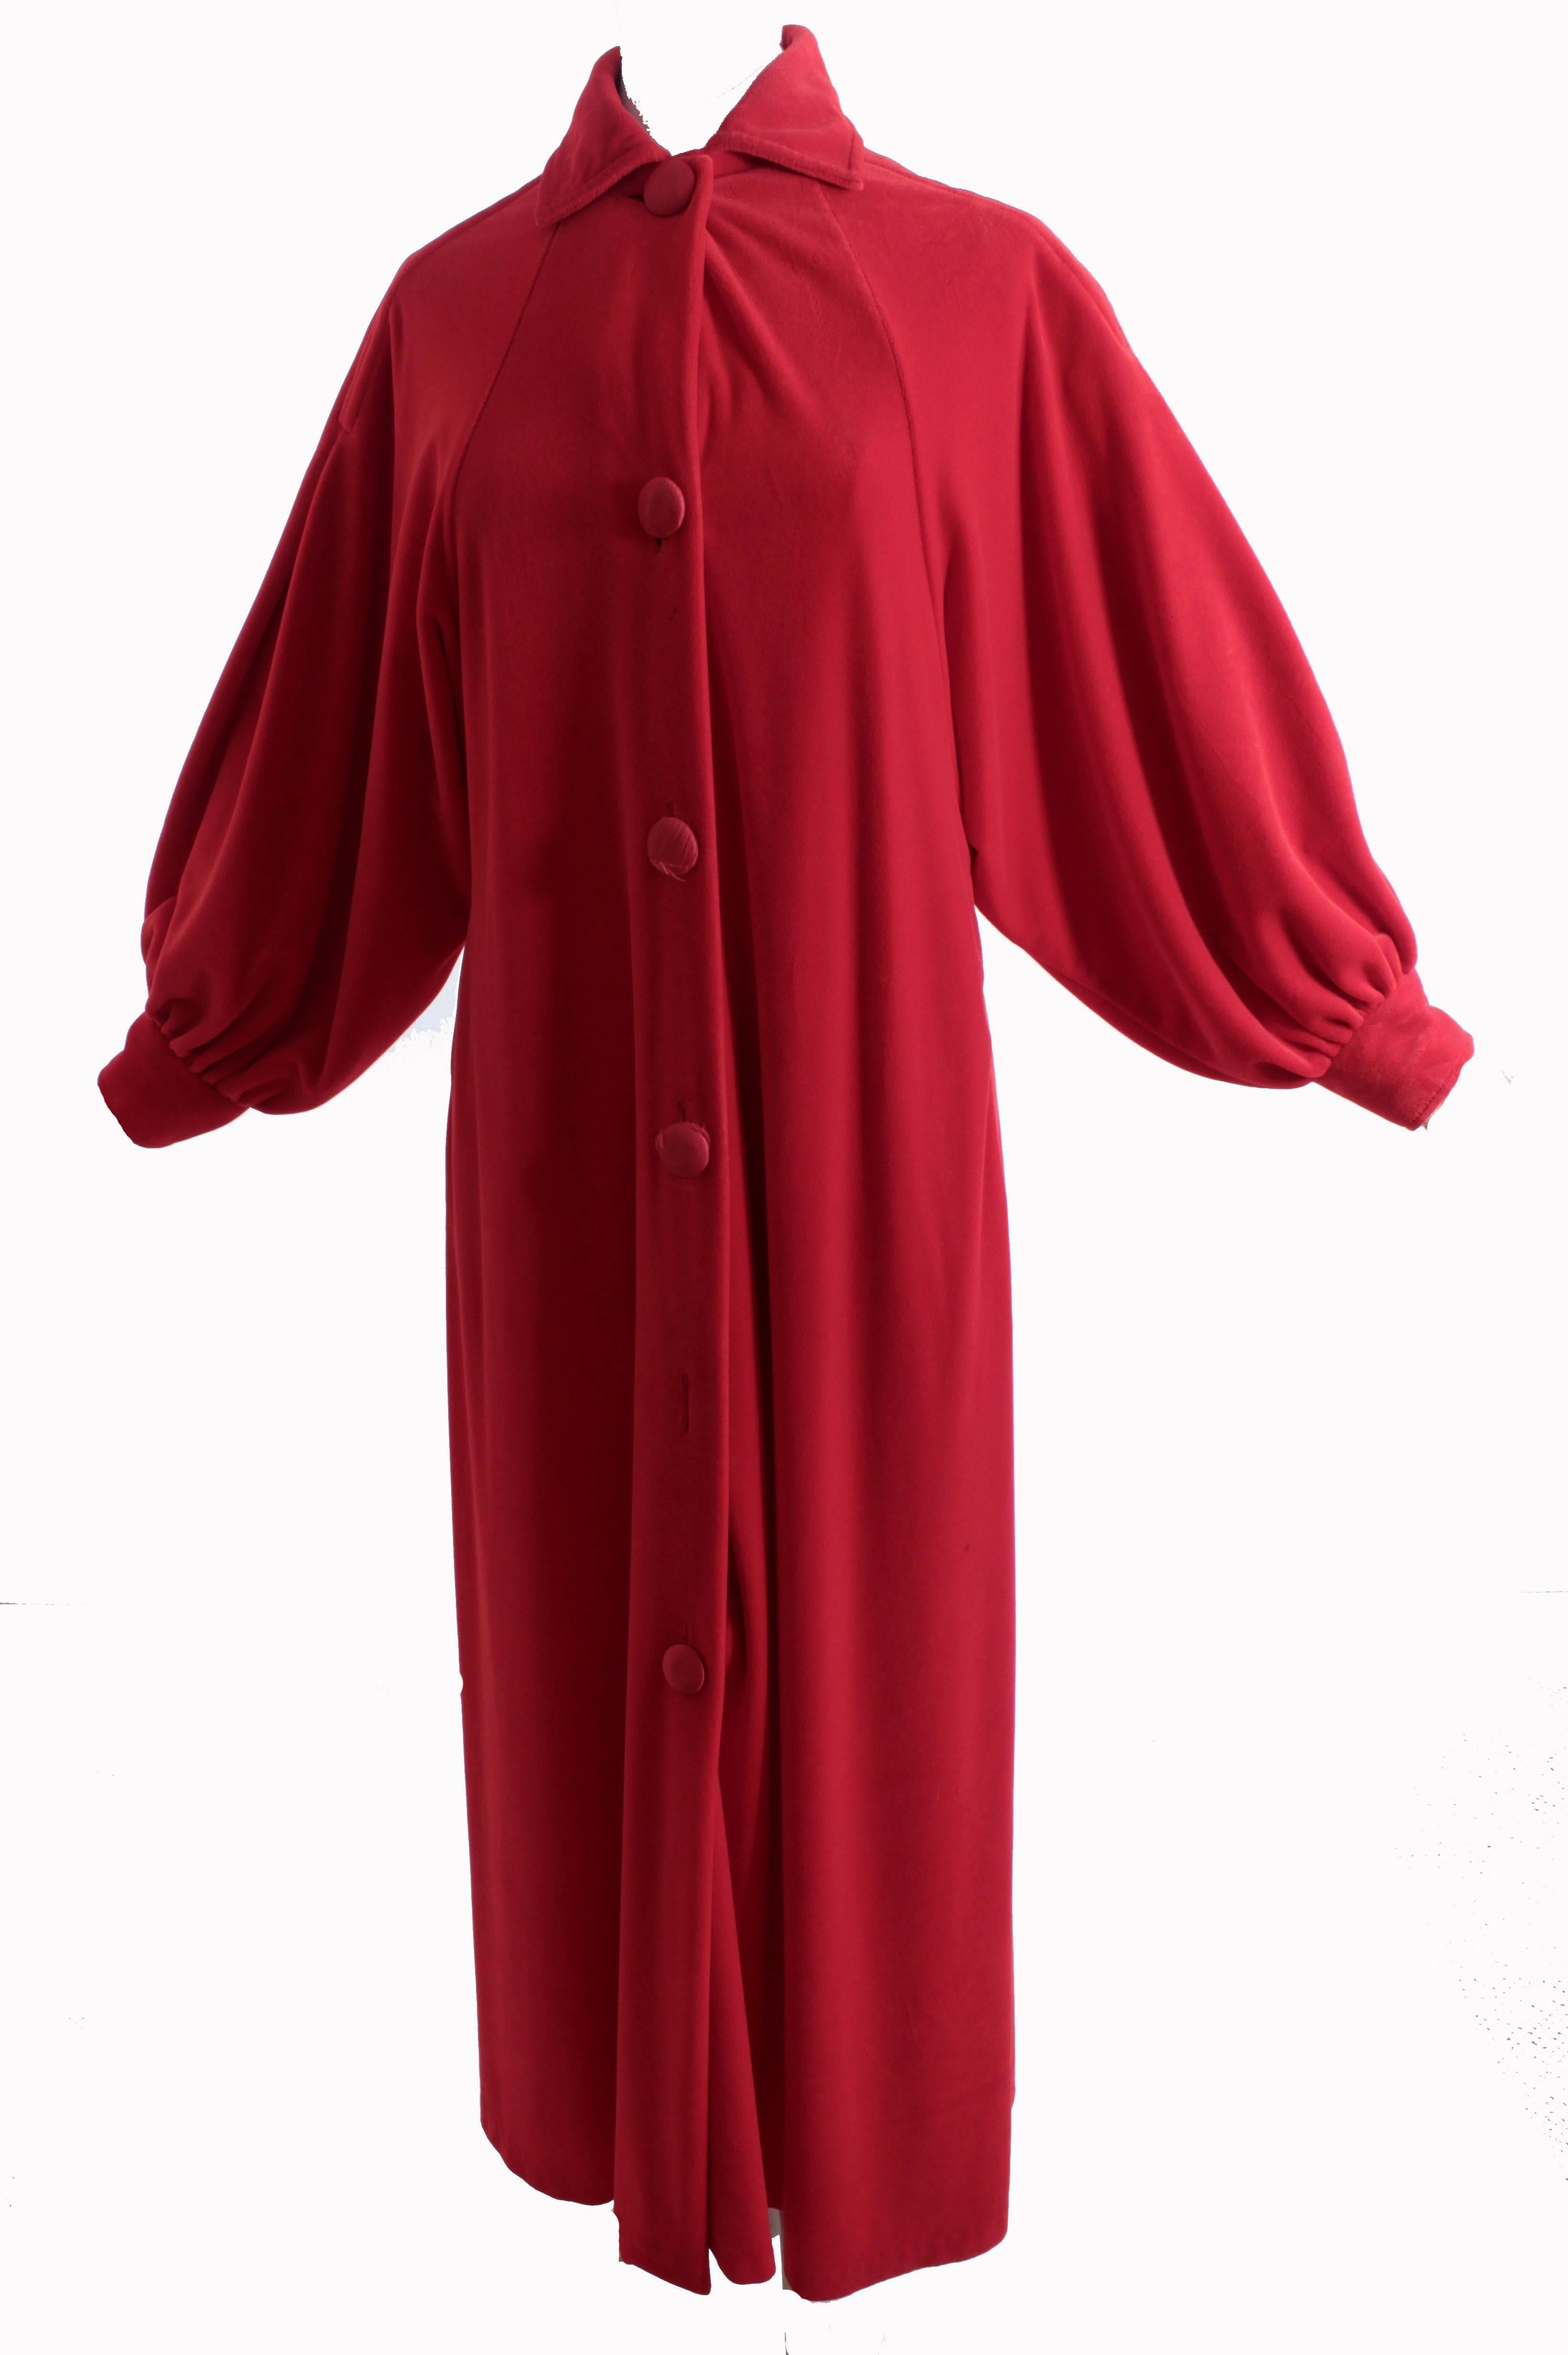 This red velvet robe was made by Pierre Cardin, most likely in the late 50s or early 60s.  It features billowy Dolmen sleeves that fasten at the wrists with a satin covered button, and satin covered buttons down the front.  Unlined with side